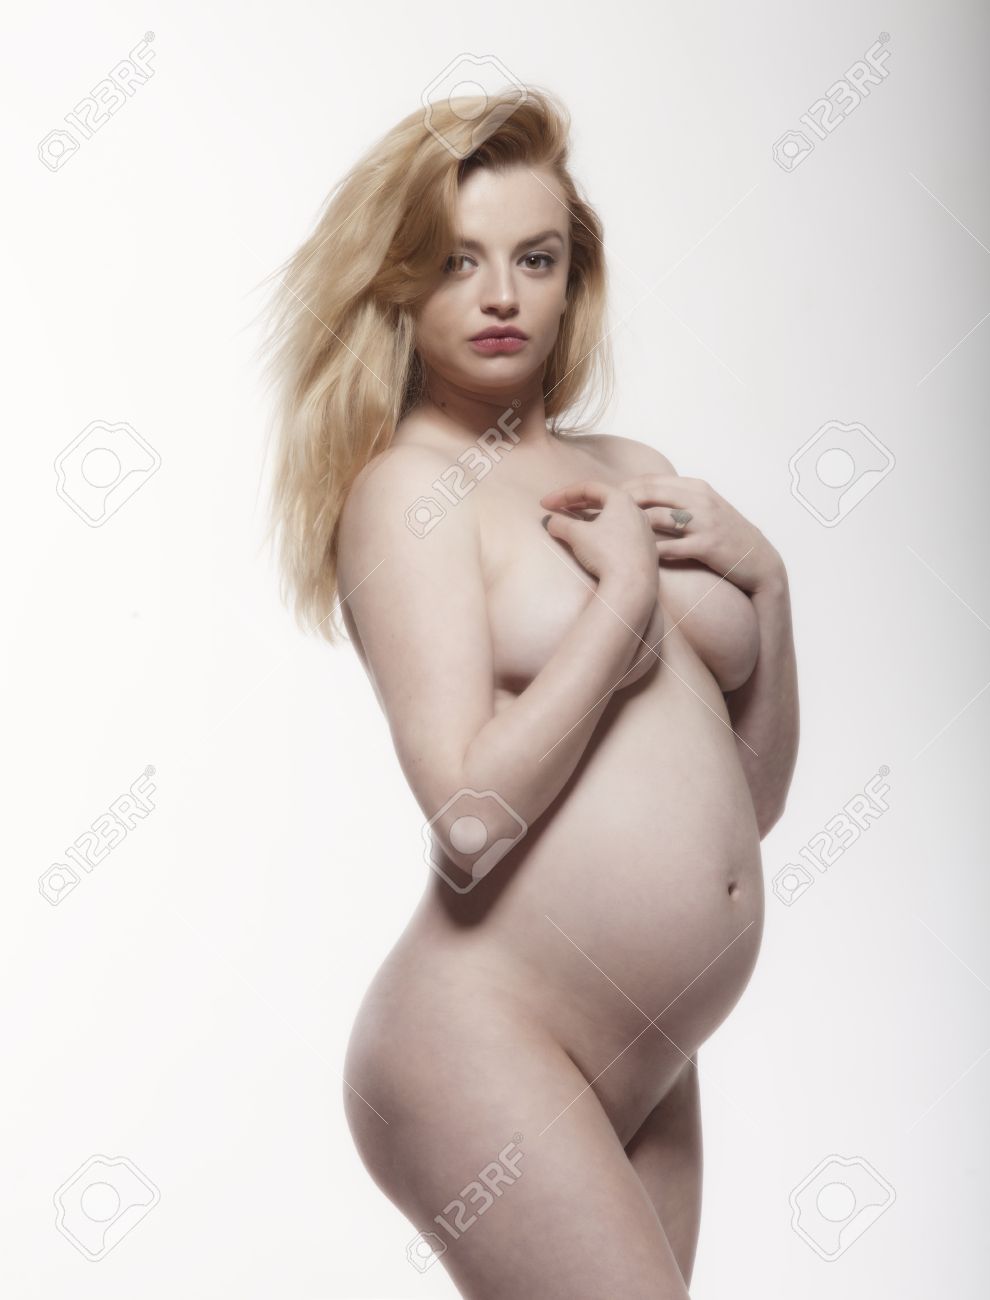 Pregnant blonde woman nude